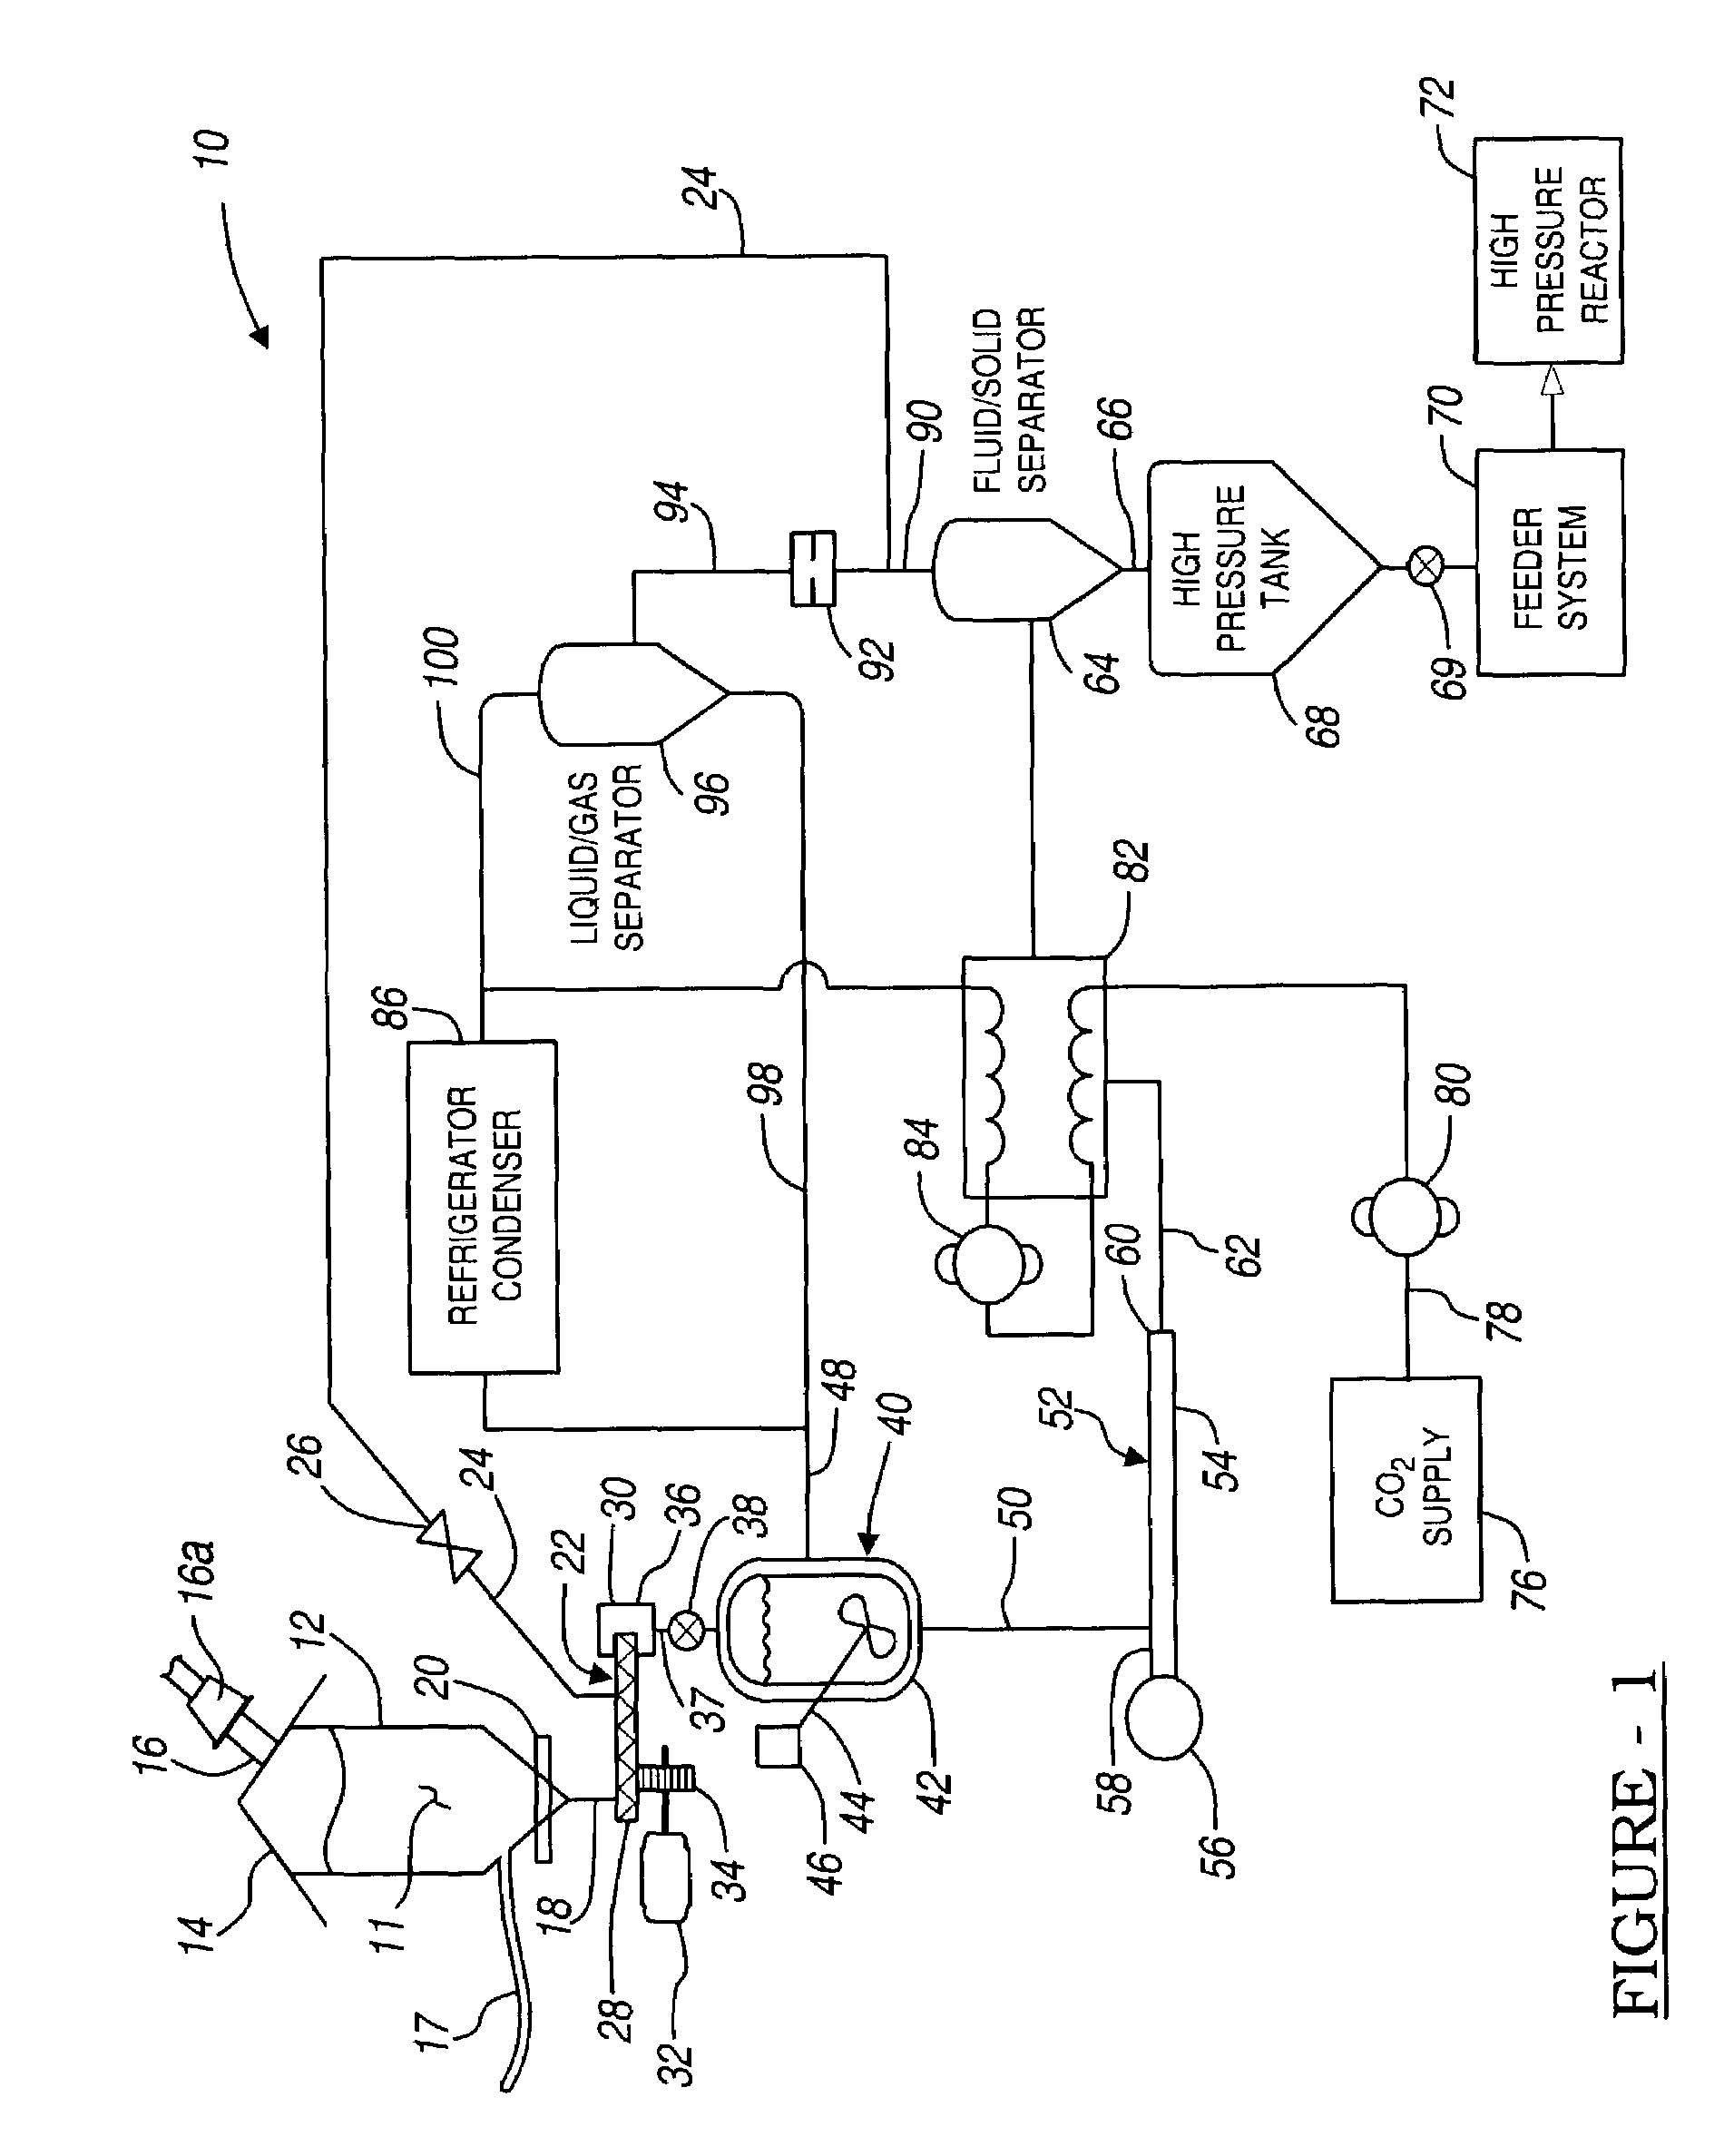 Method and apparatus for continuously feeding and pressurizing a solid material into a high pressure system